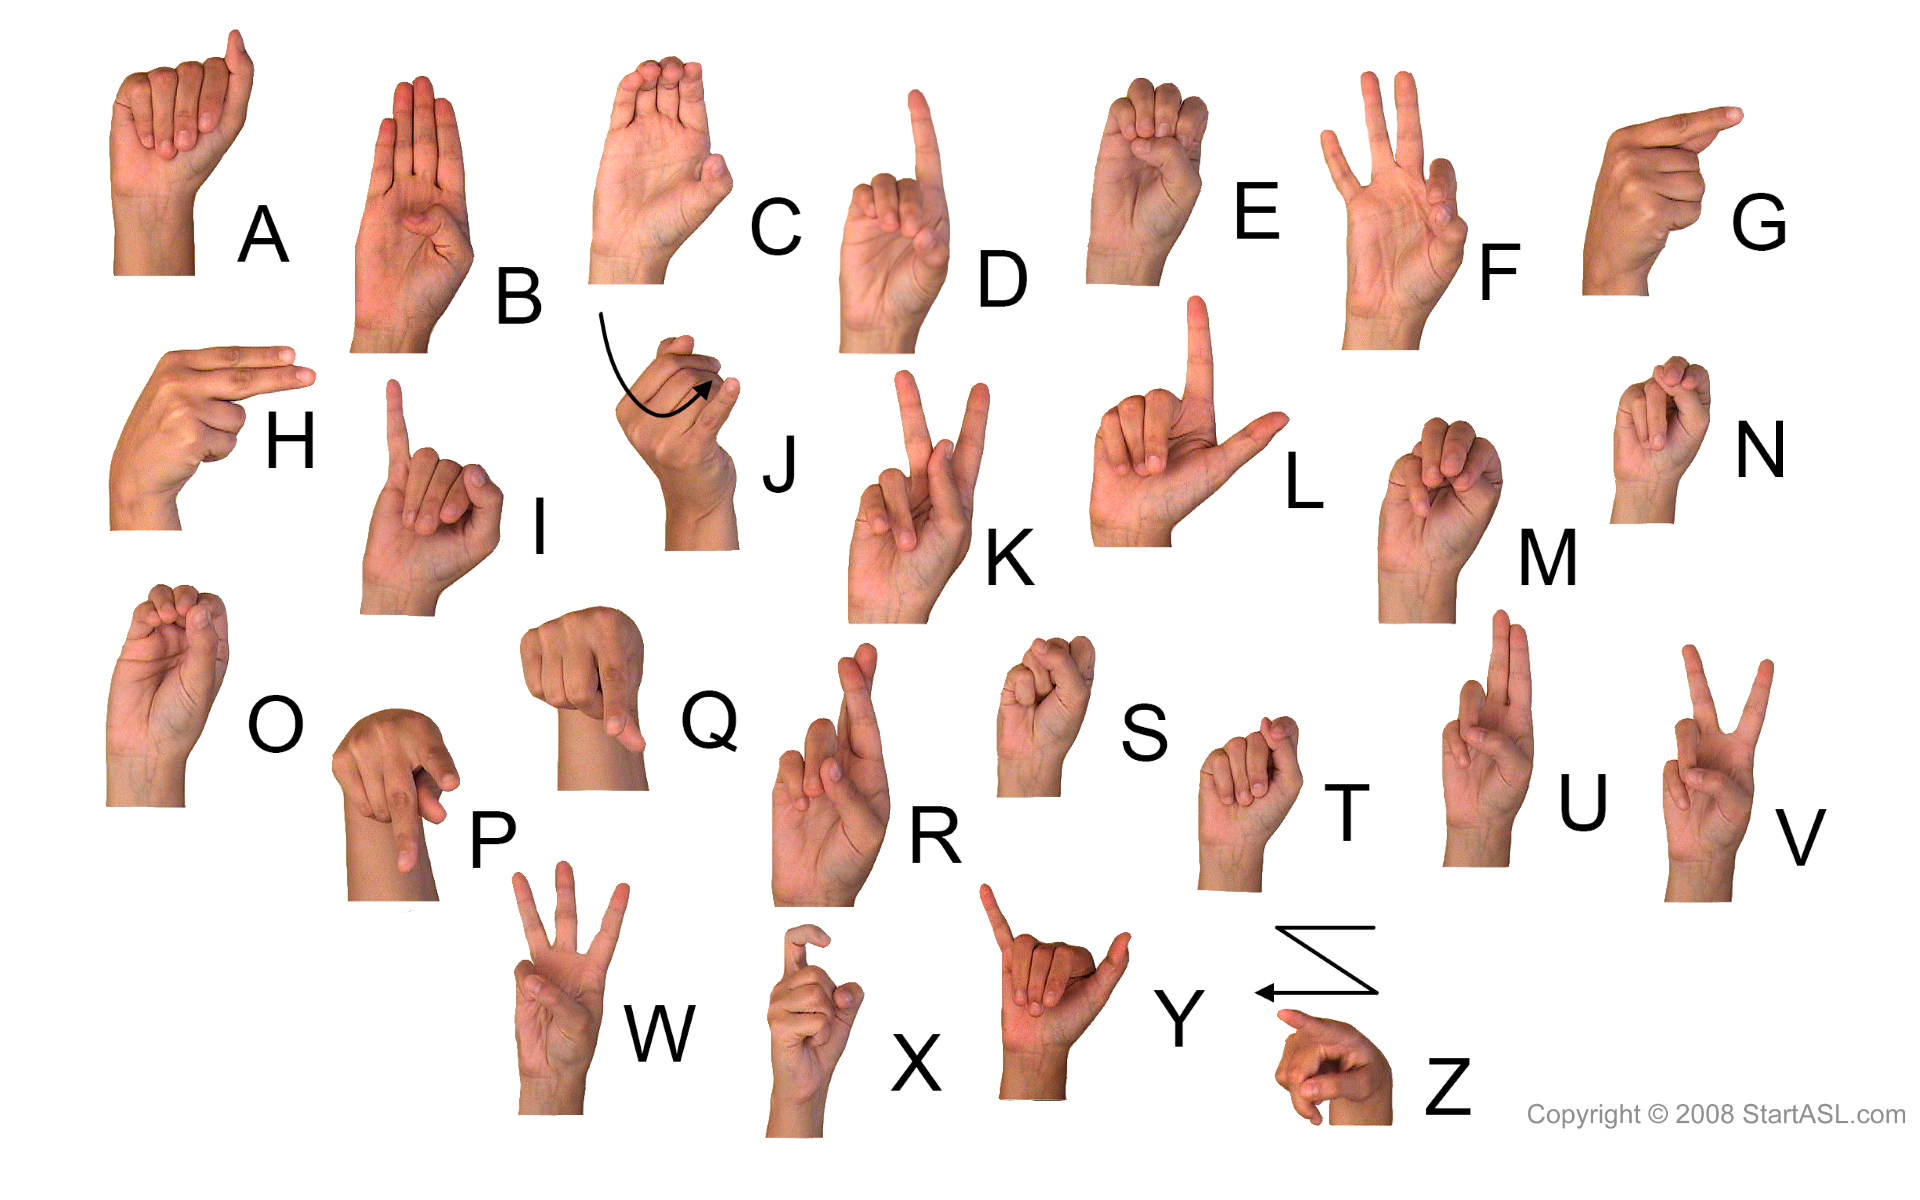 Sign Language Alphabet Free Downloads to Learn it Fast